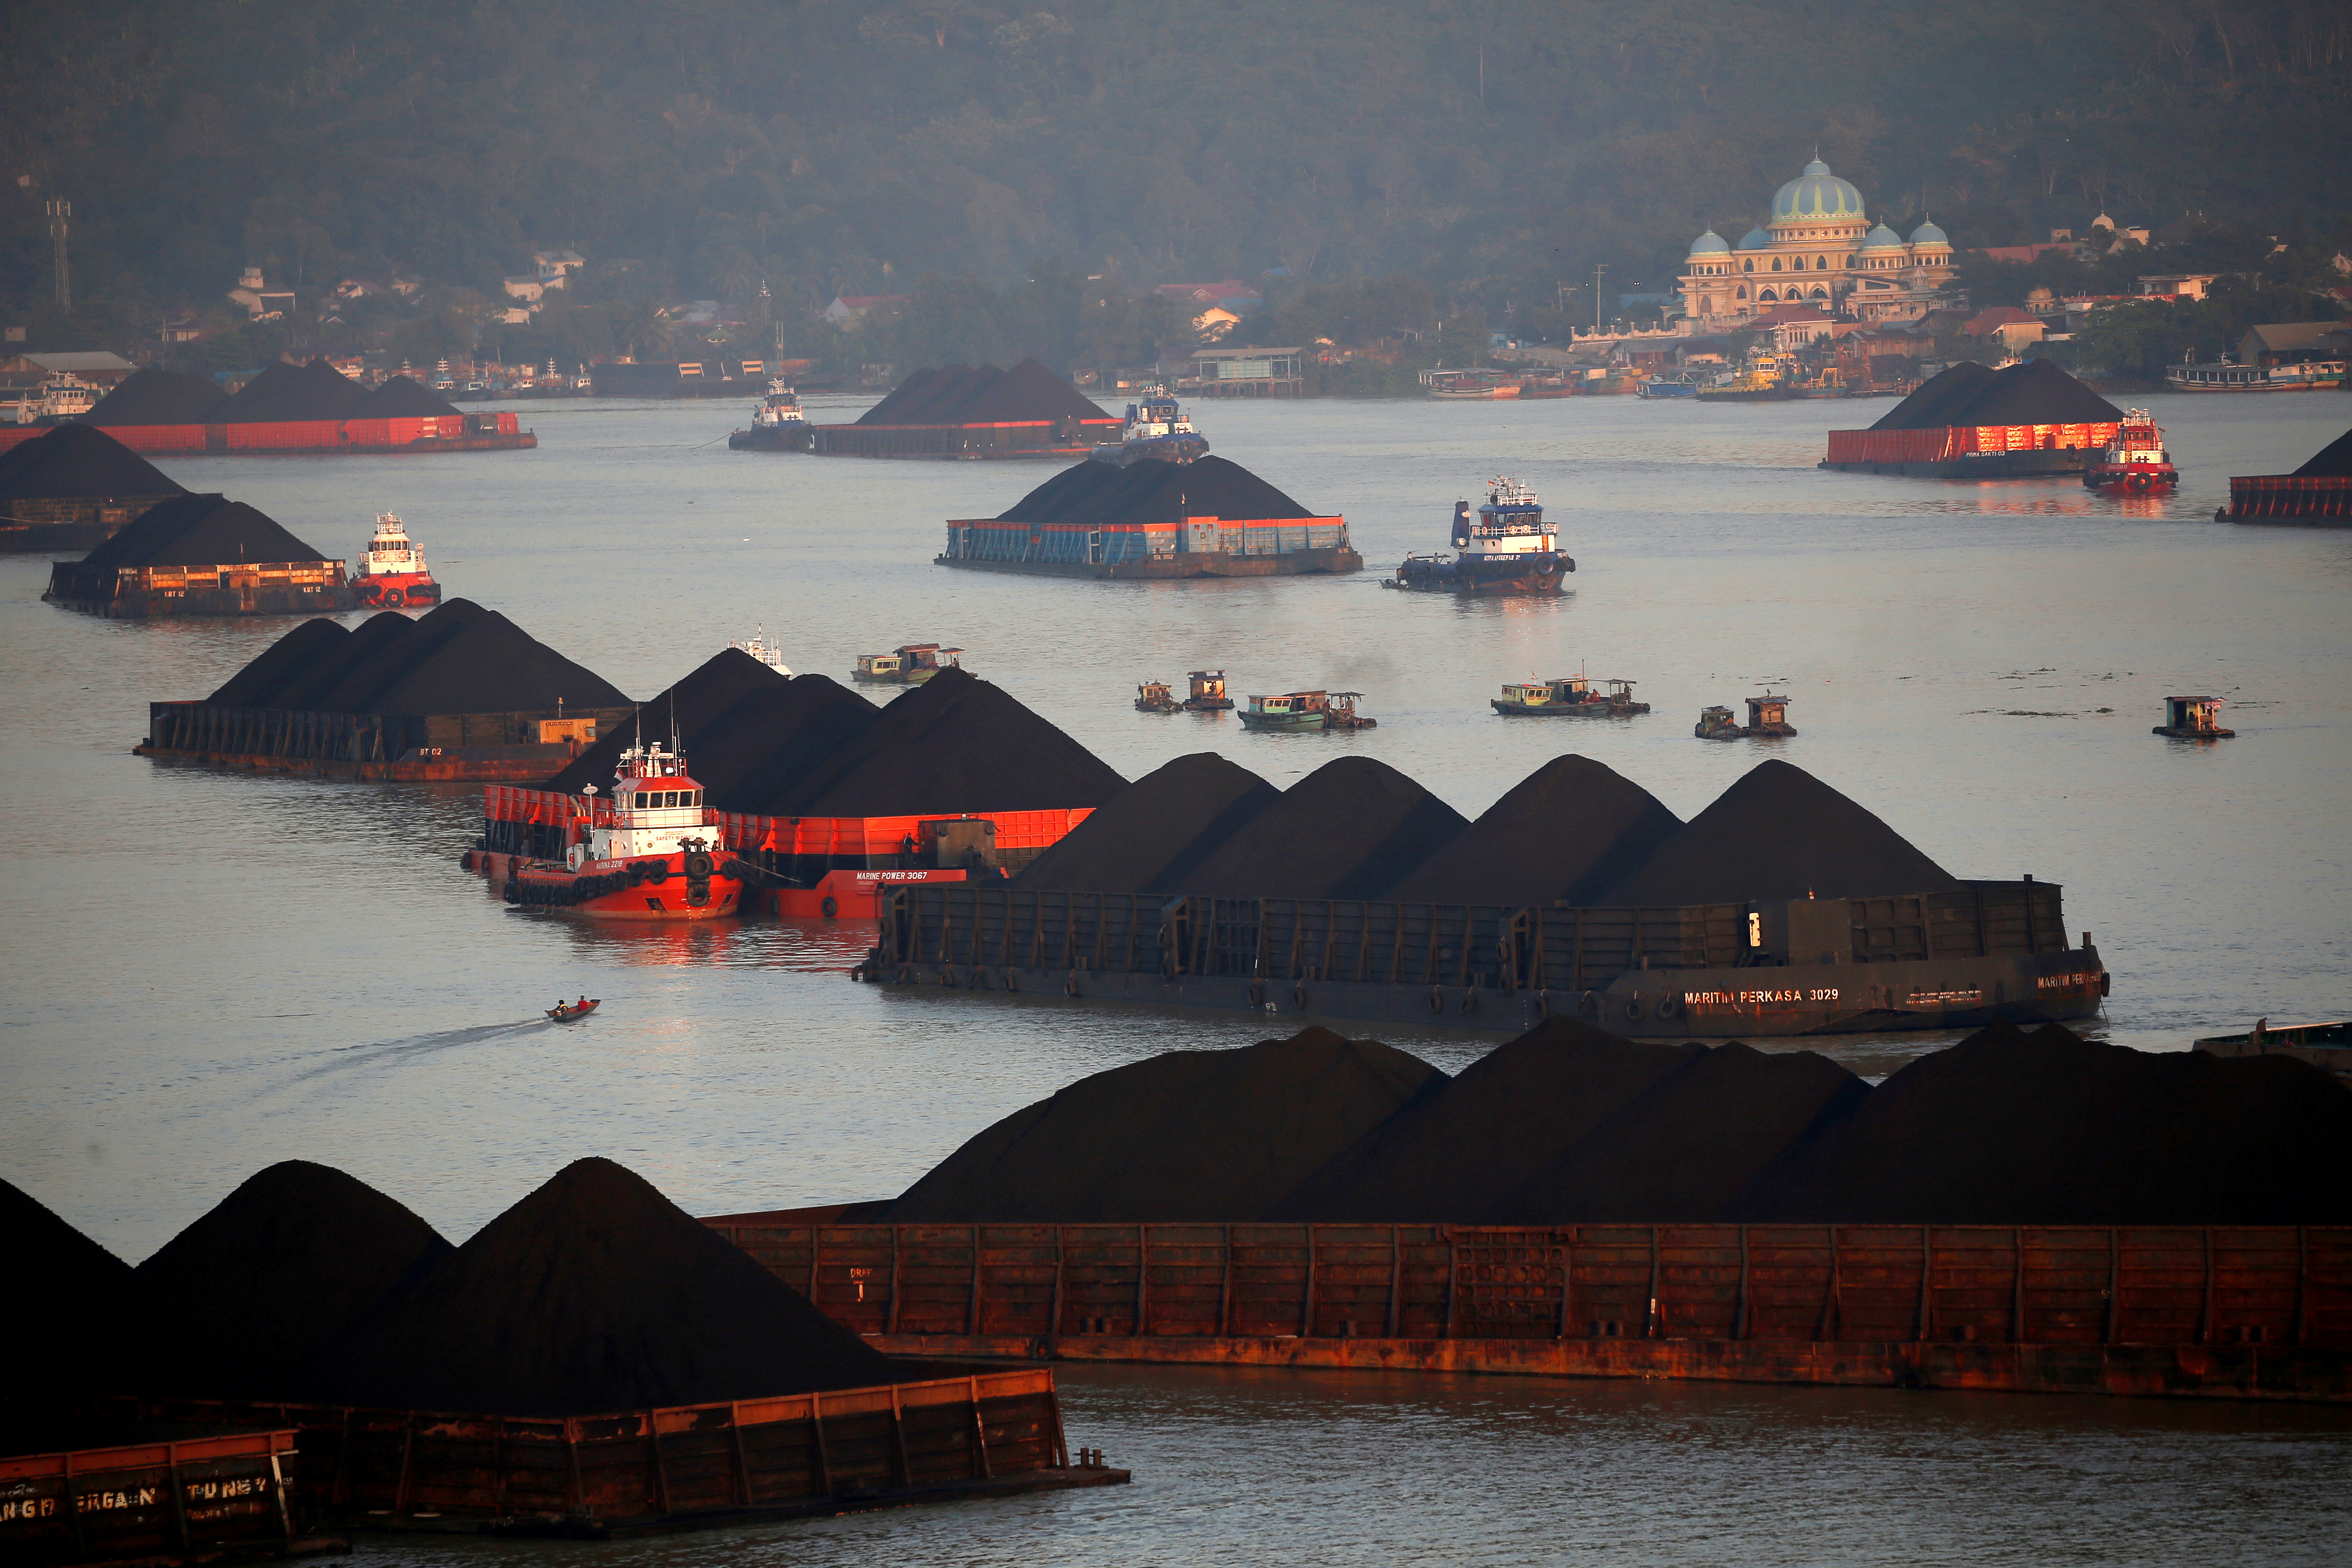 Coal barges are pictured as they queue to be pull along Mahakam river in Samarinda, East Kalimantan province